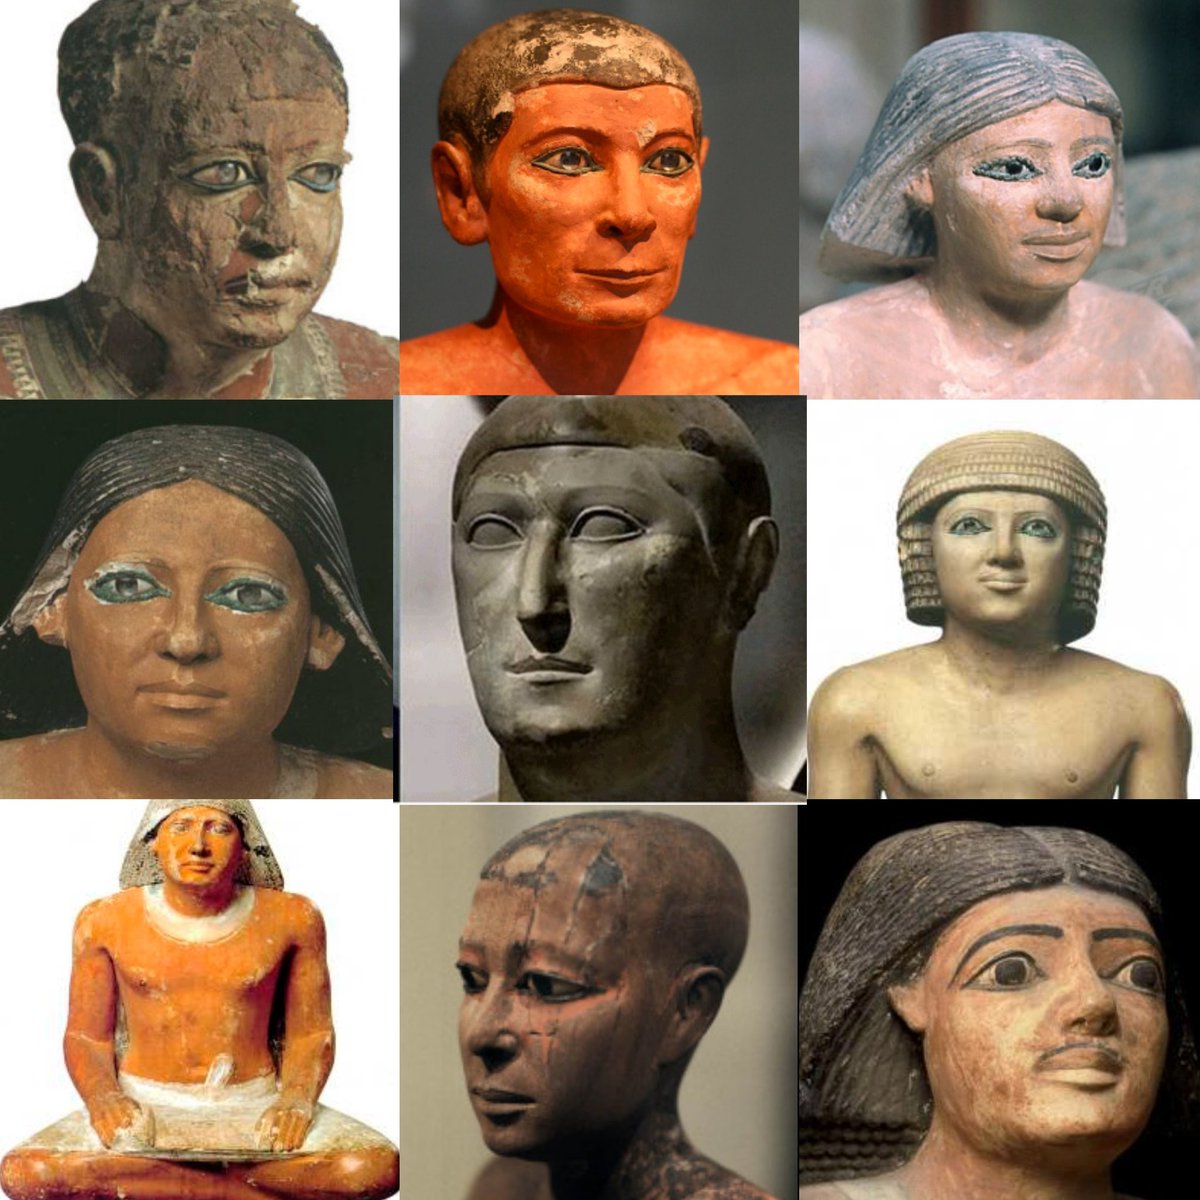 "Ugghhghh but the earlier populations of egypt must have been black, then they later mixed with th-"No, they were not, no bro, they did not mix.All these faces are of the earliest dynasty, the pyramid builders dynasty.  https://twitter.com/pierre_tmc/status/1313629679715340288